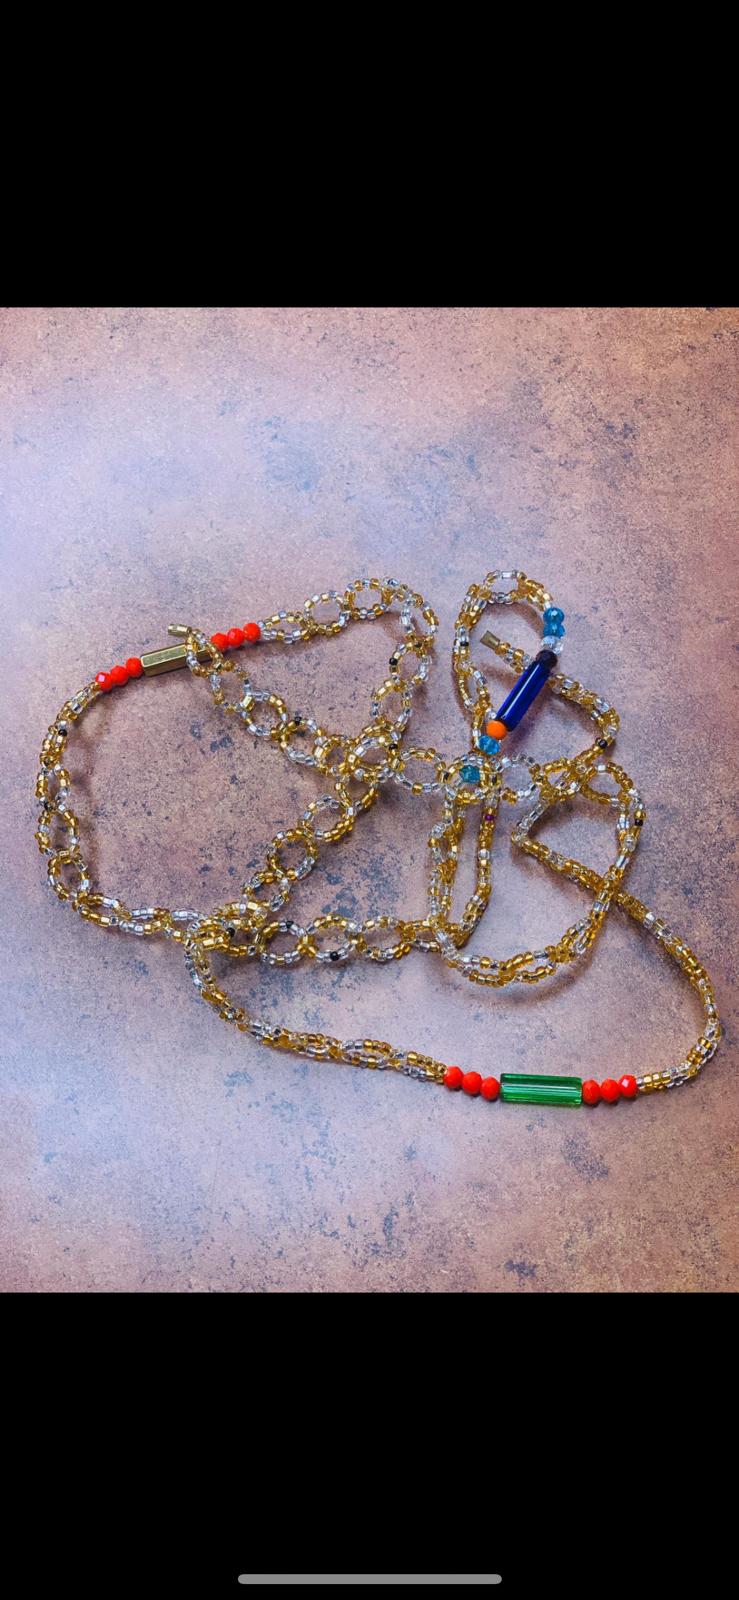 38 Inches Gold And Clear Crystal Beads With Red, Green And Blue Pebble Bar Removable Screw Waist Beads 